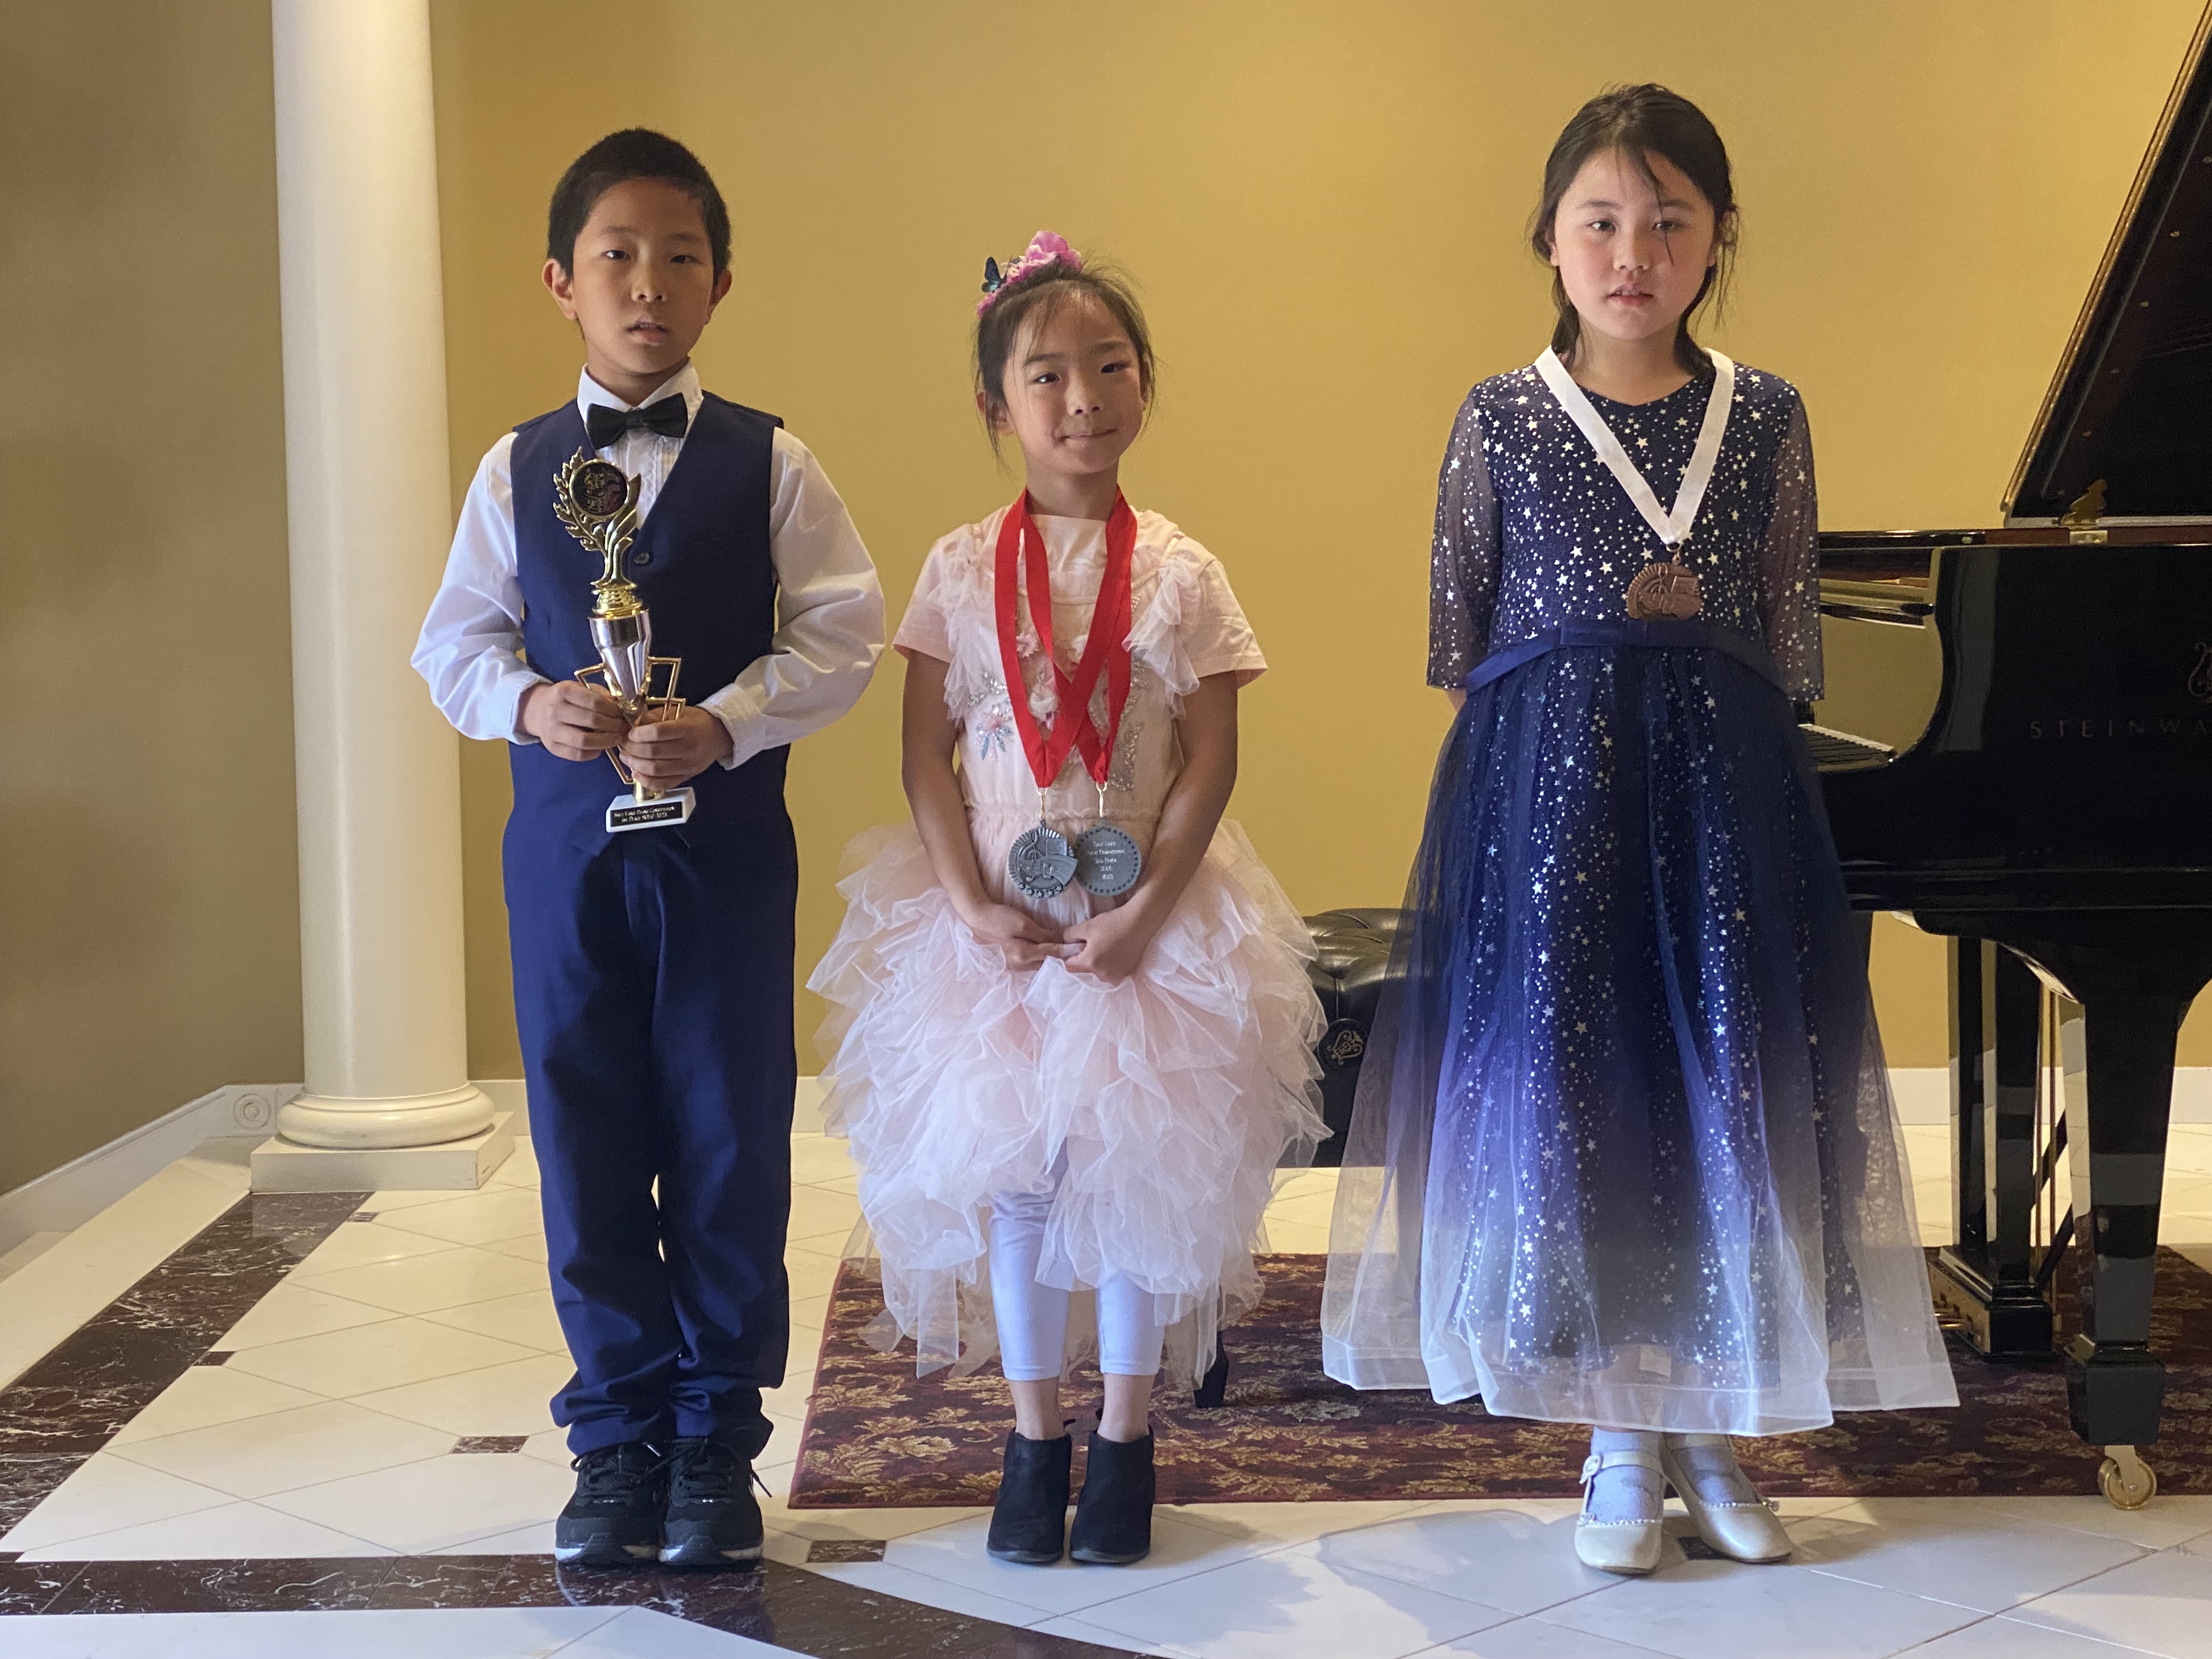 Friday May 12  1:00  age 7-9  Baroque/Romantic/Impressionistic  High Silver